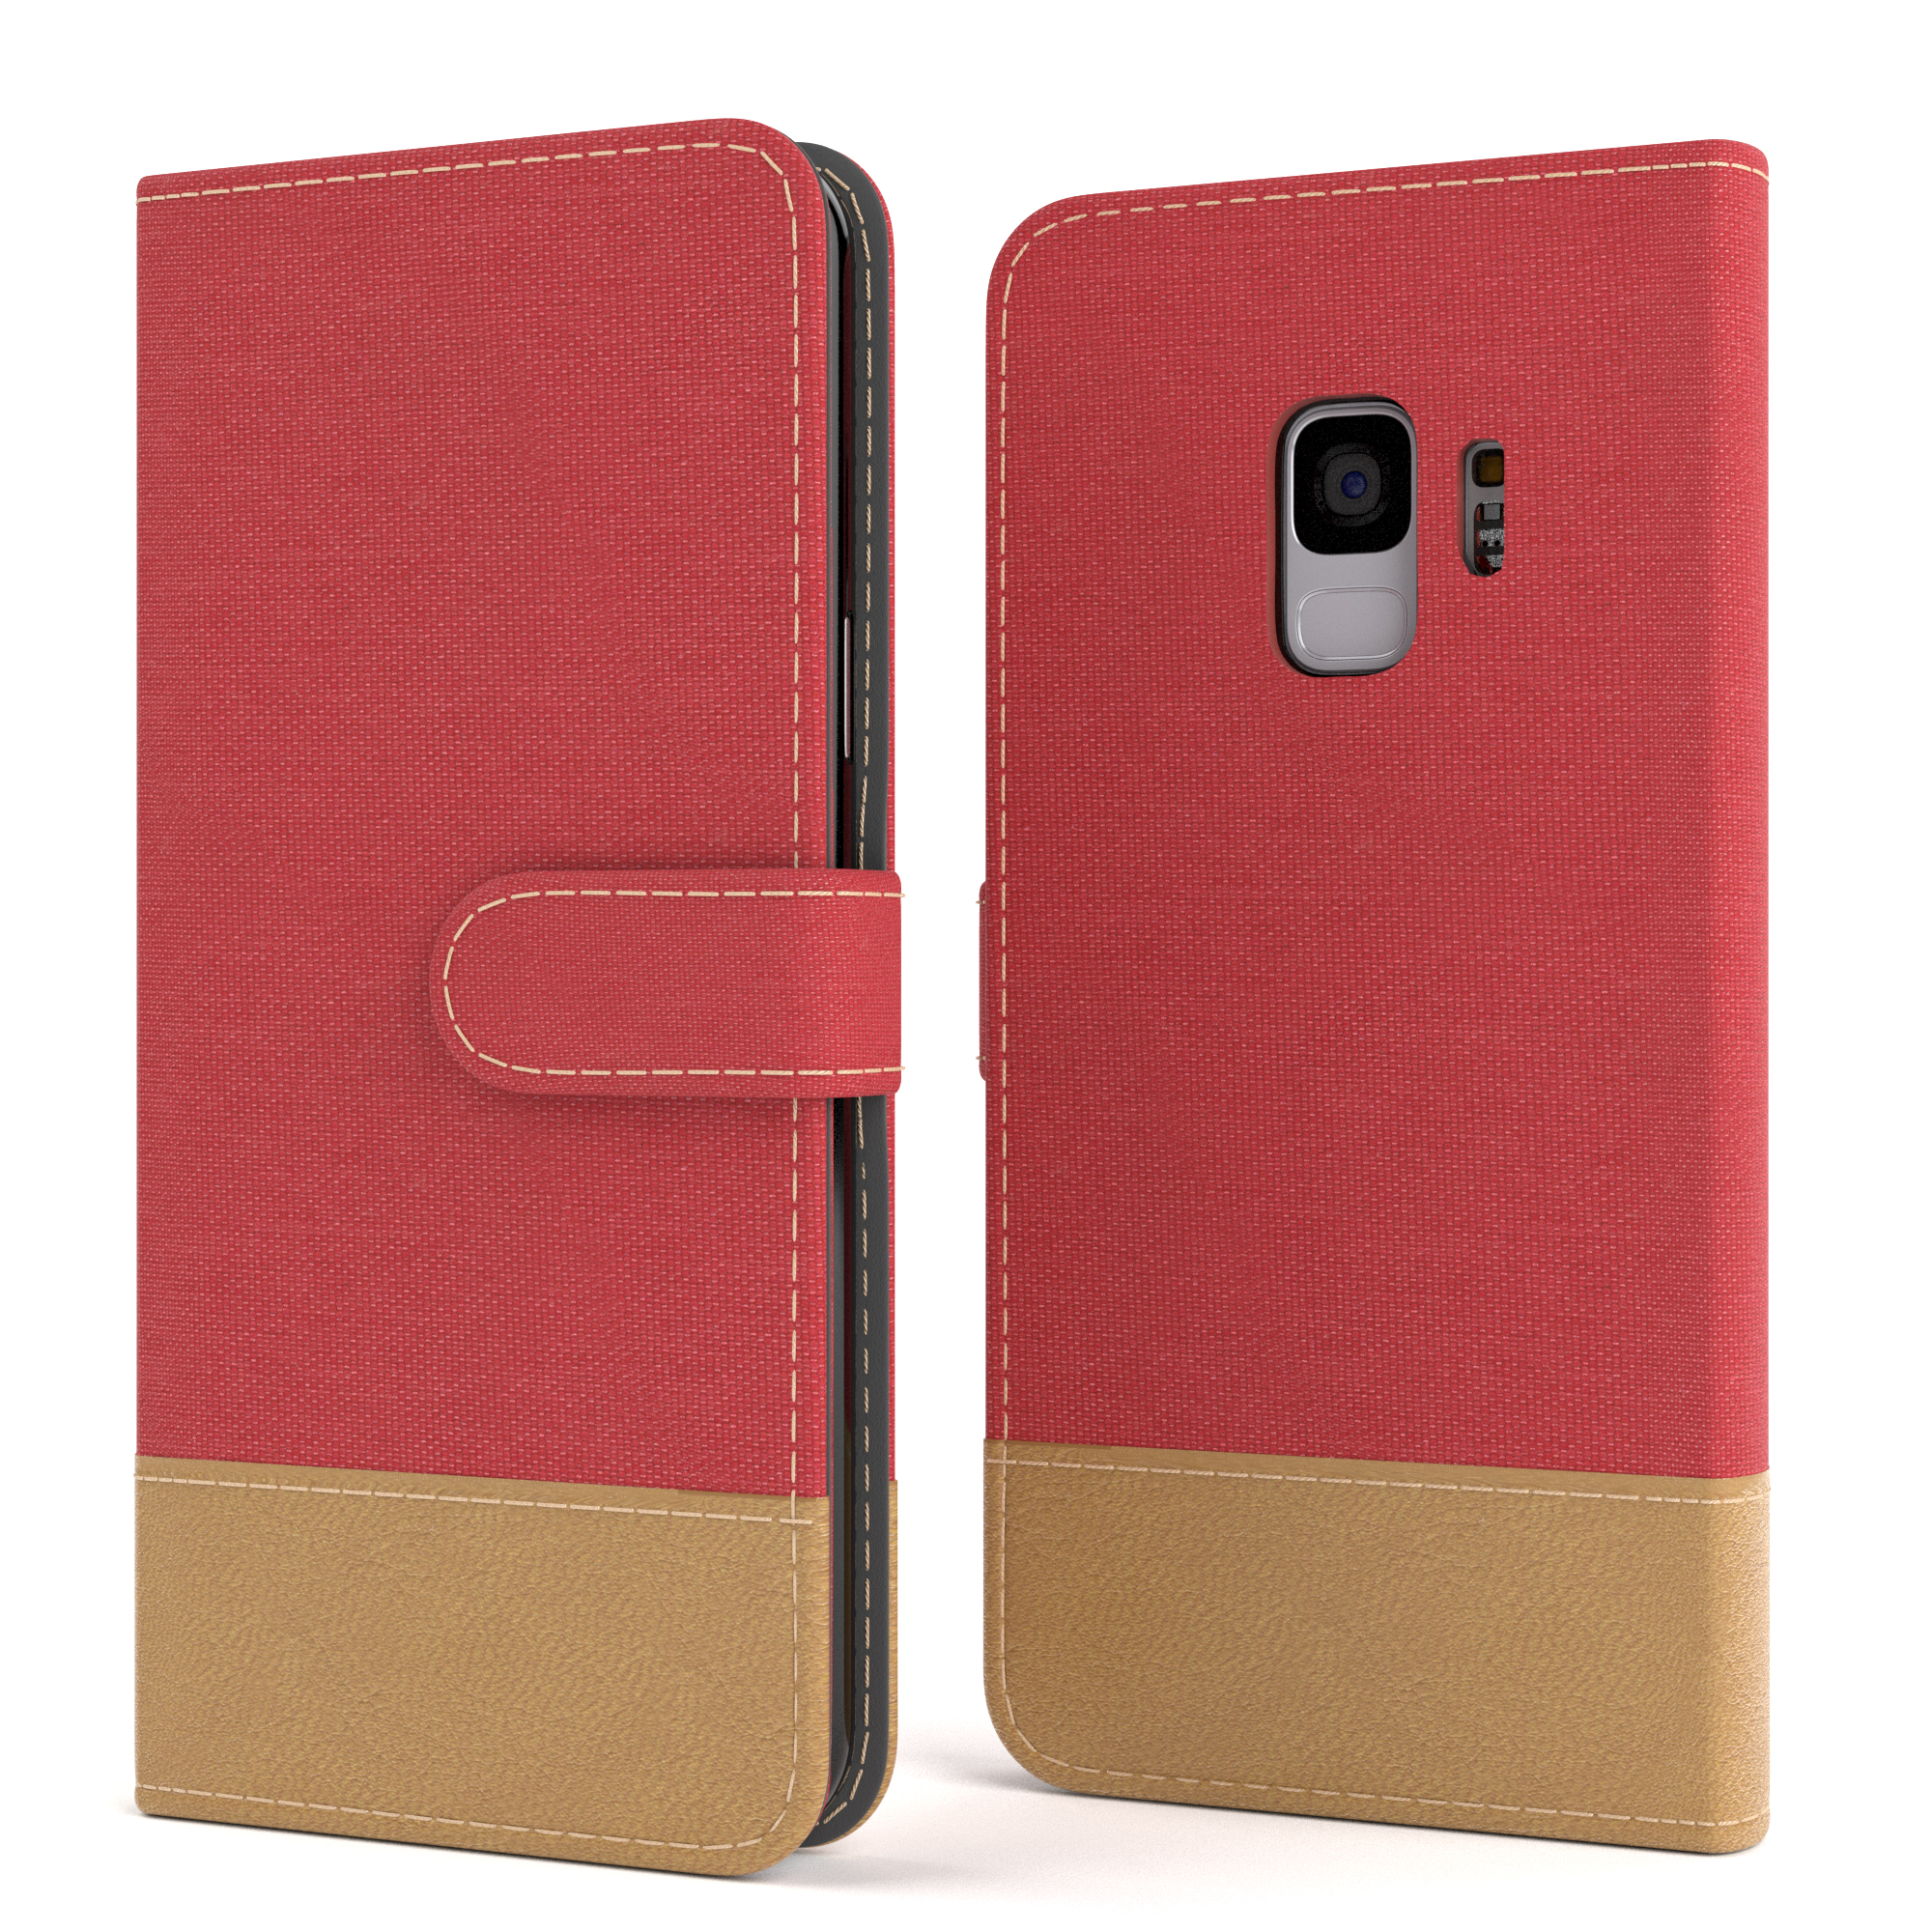 CASE Jeans Kartenfach, Galaxy EAZY Bookstyle mit S9, Rot Bookcover, Samsung, Klapphülle